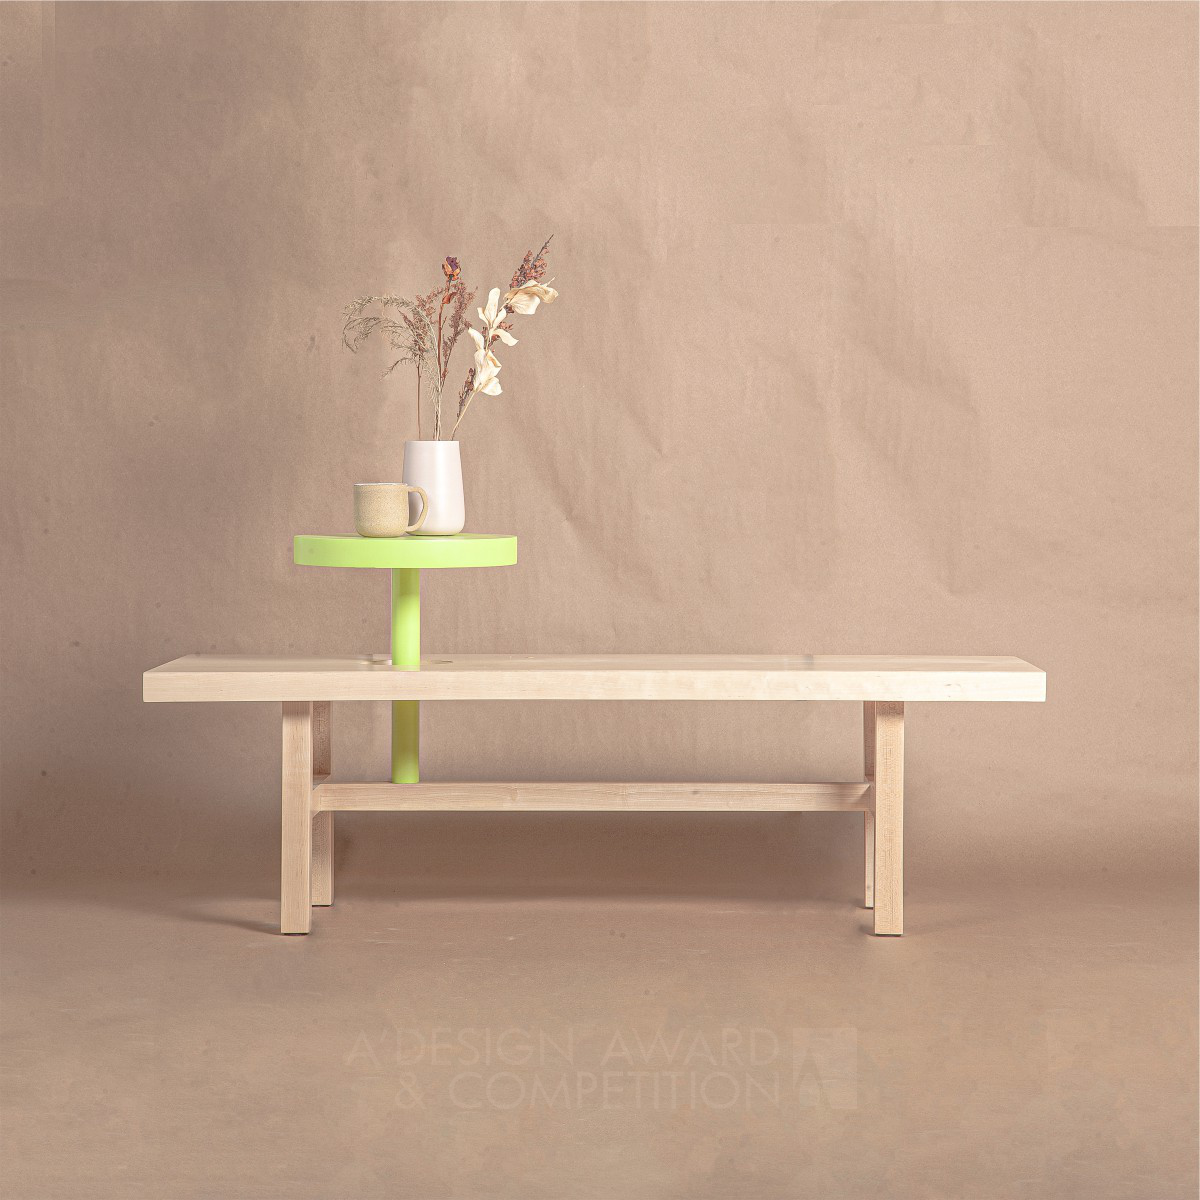 Iso Table by Meng Vang